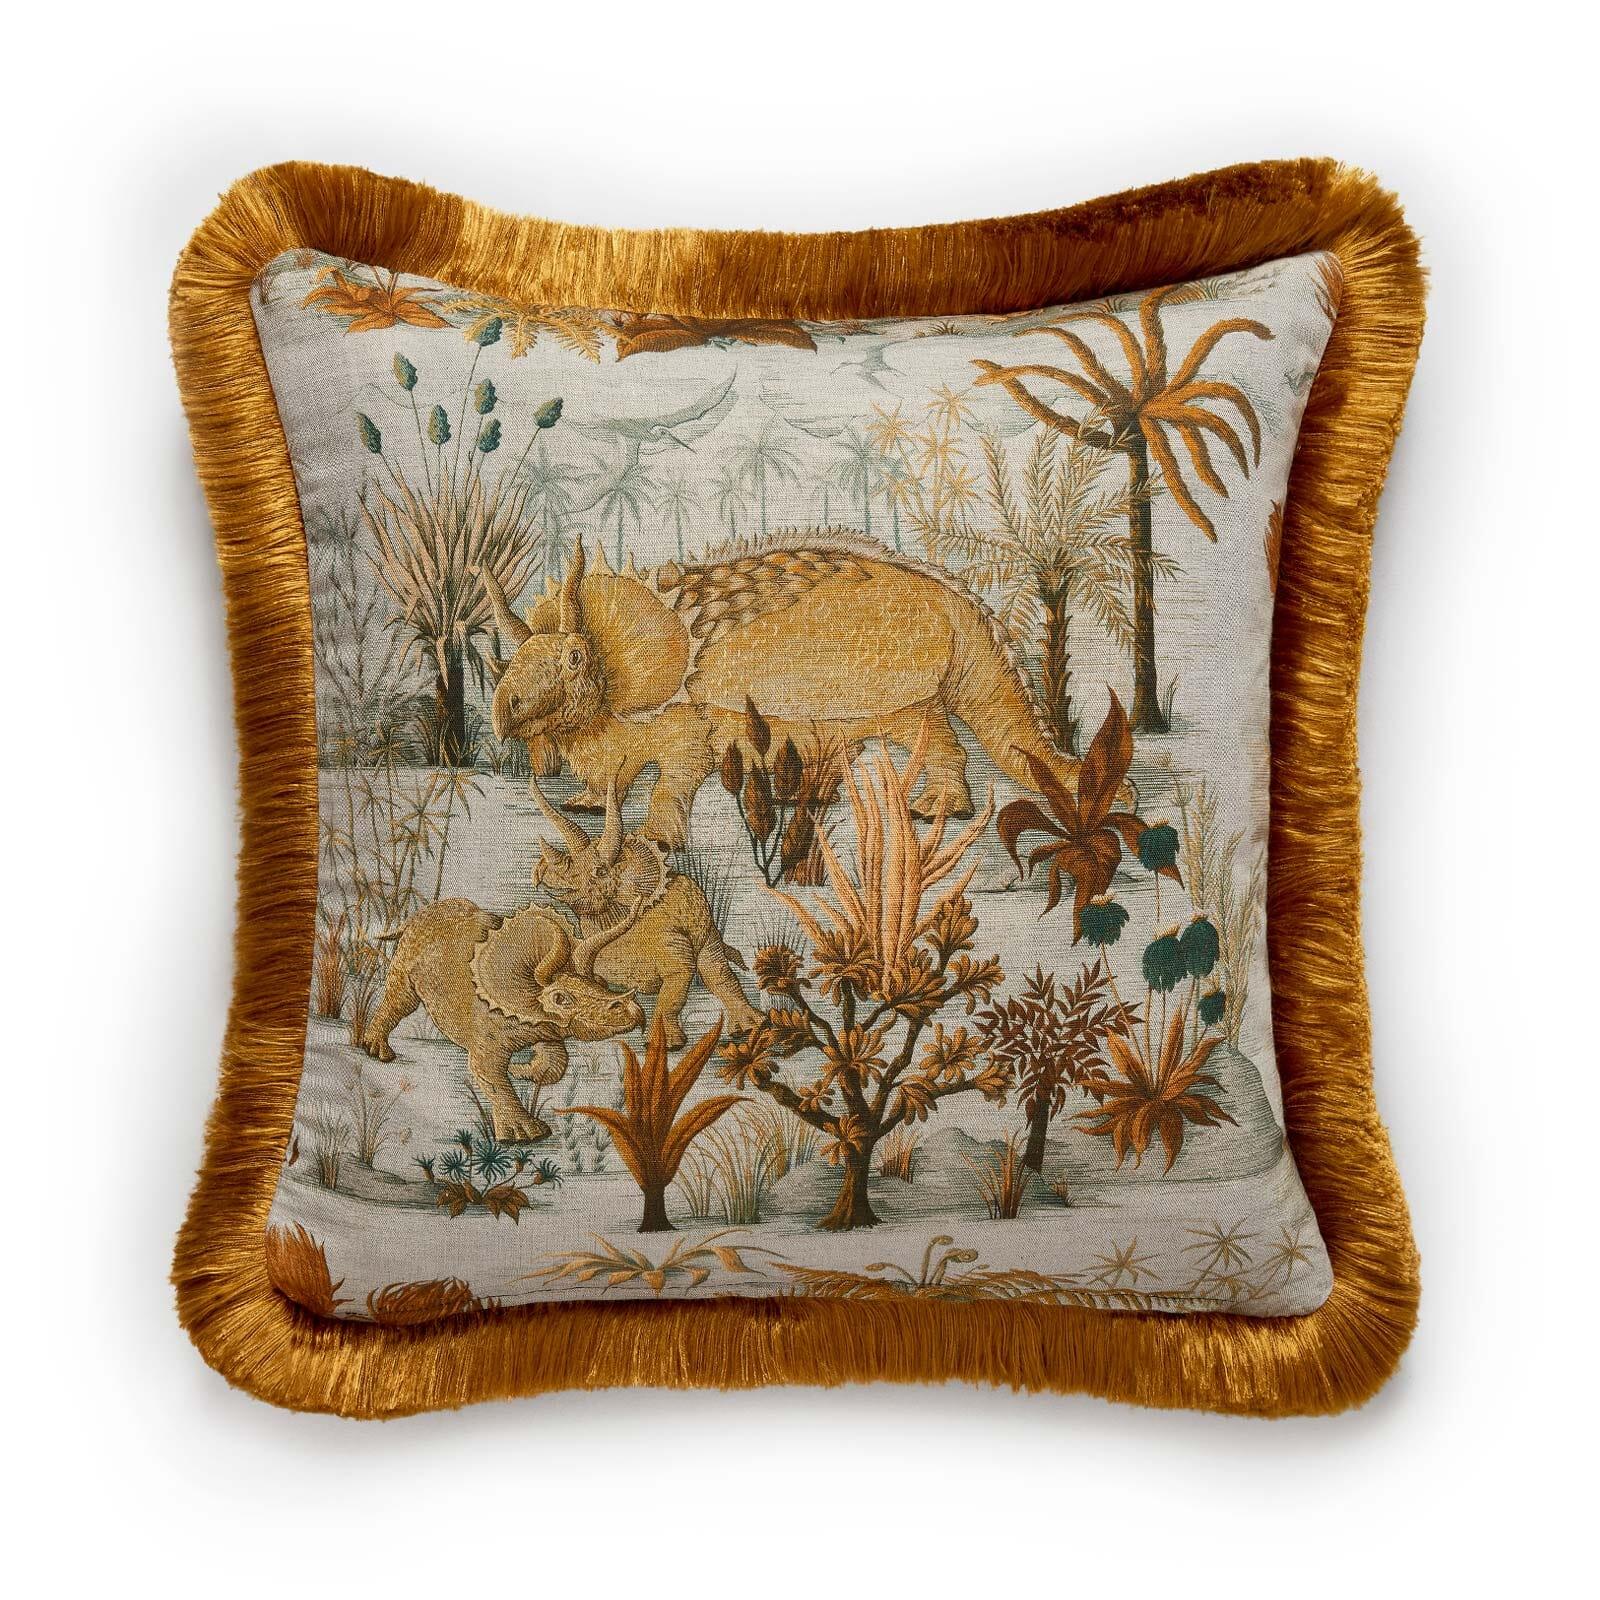 Lend your sofa a characterful update with House of Hackney's DINOSAURIA cushion. This dusk-hued design is exquisitely crafted from British cotton-linen and finished with tactile gold fringing. Mix and match yours with cushions in tonal colour